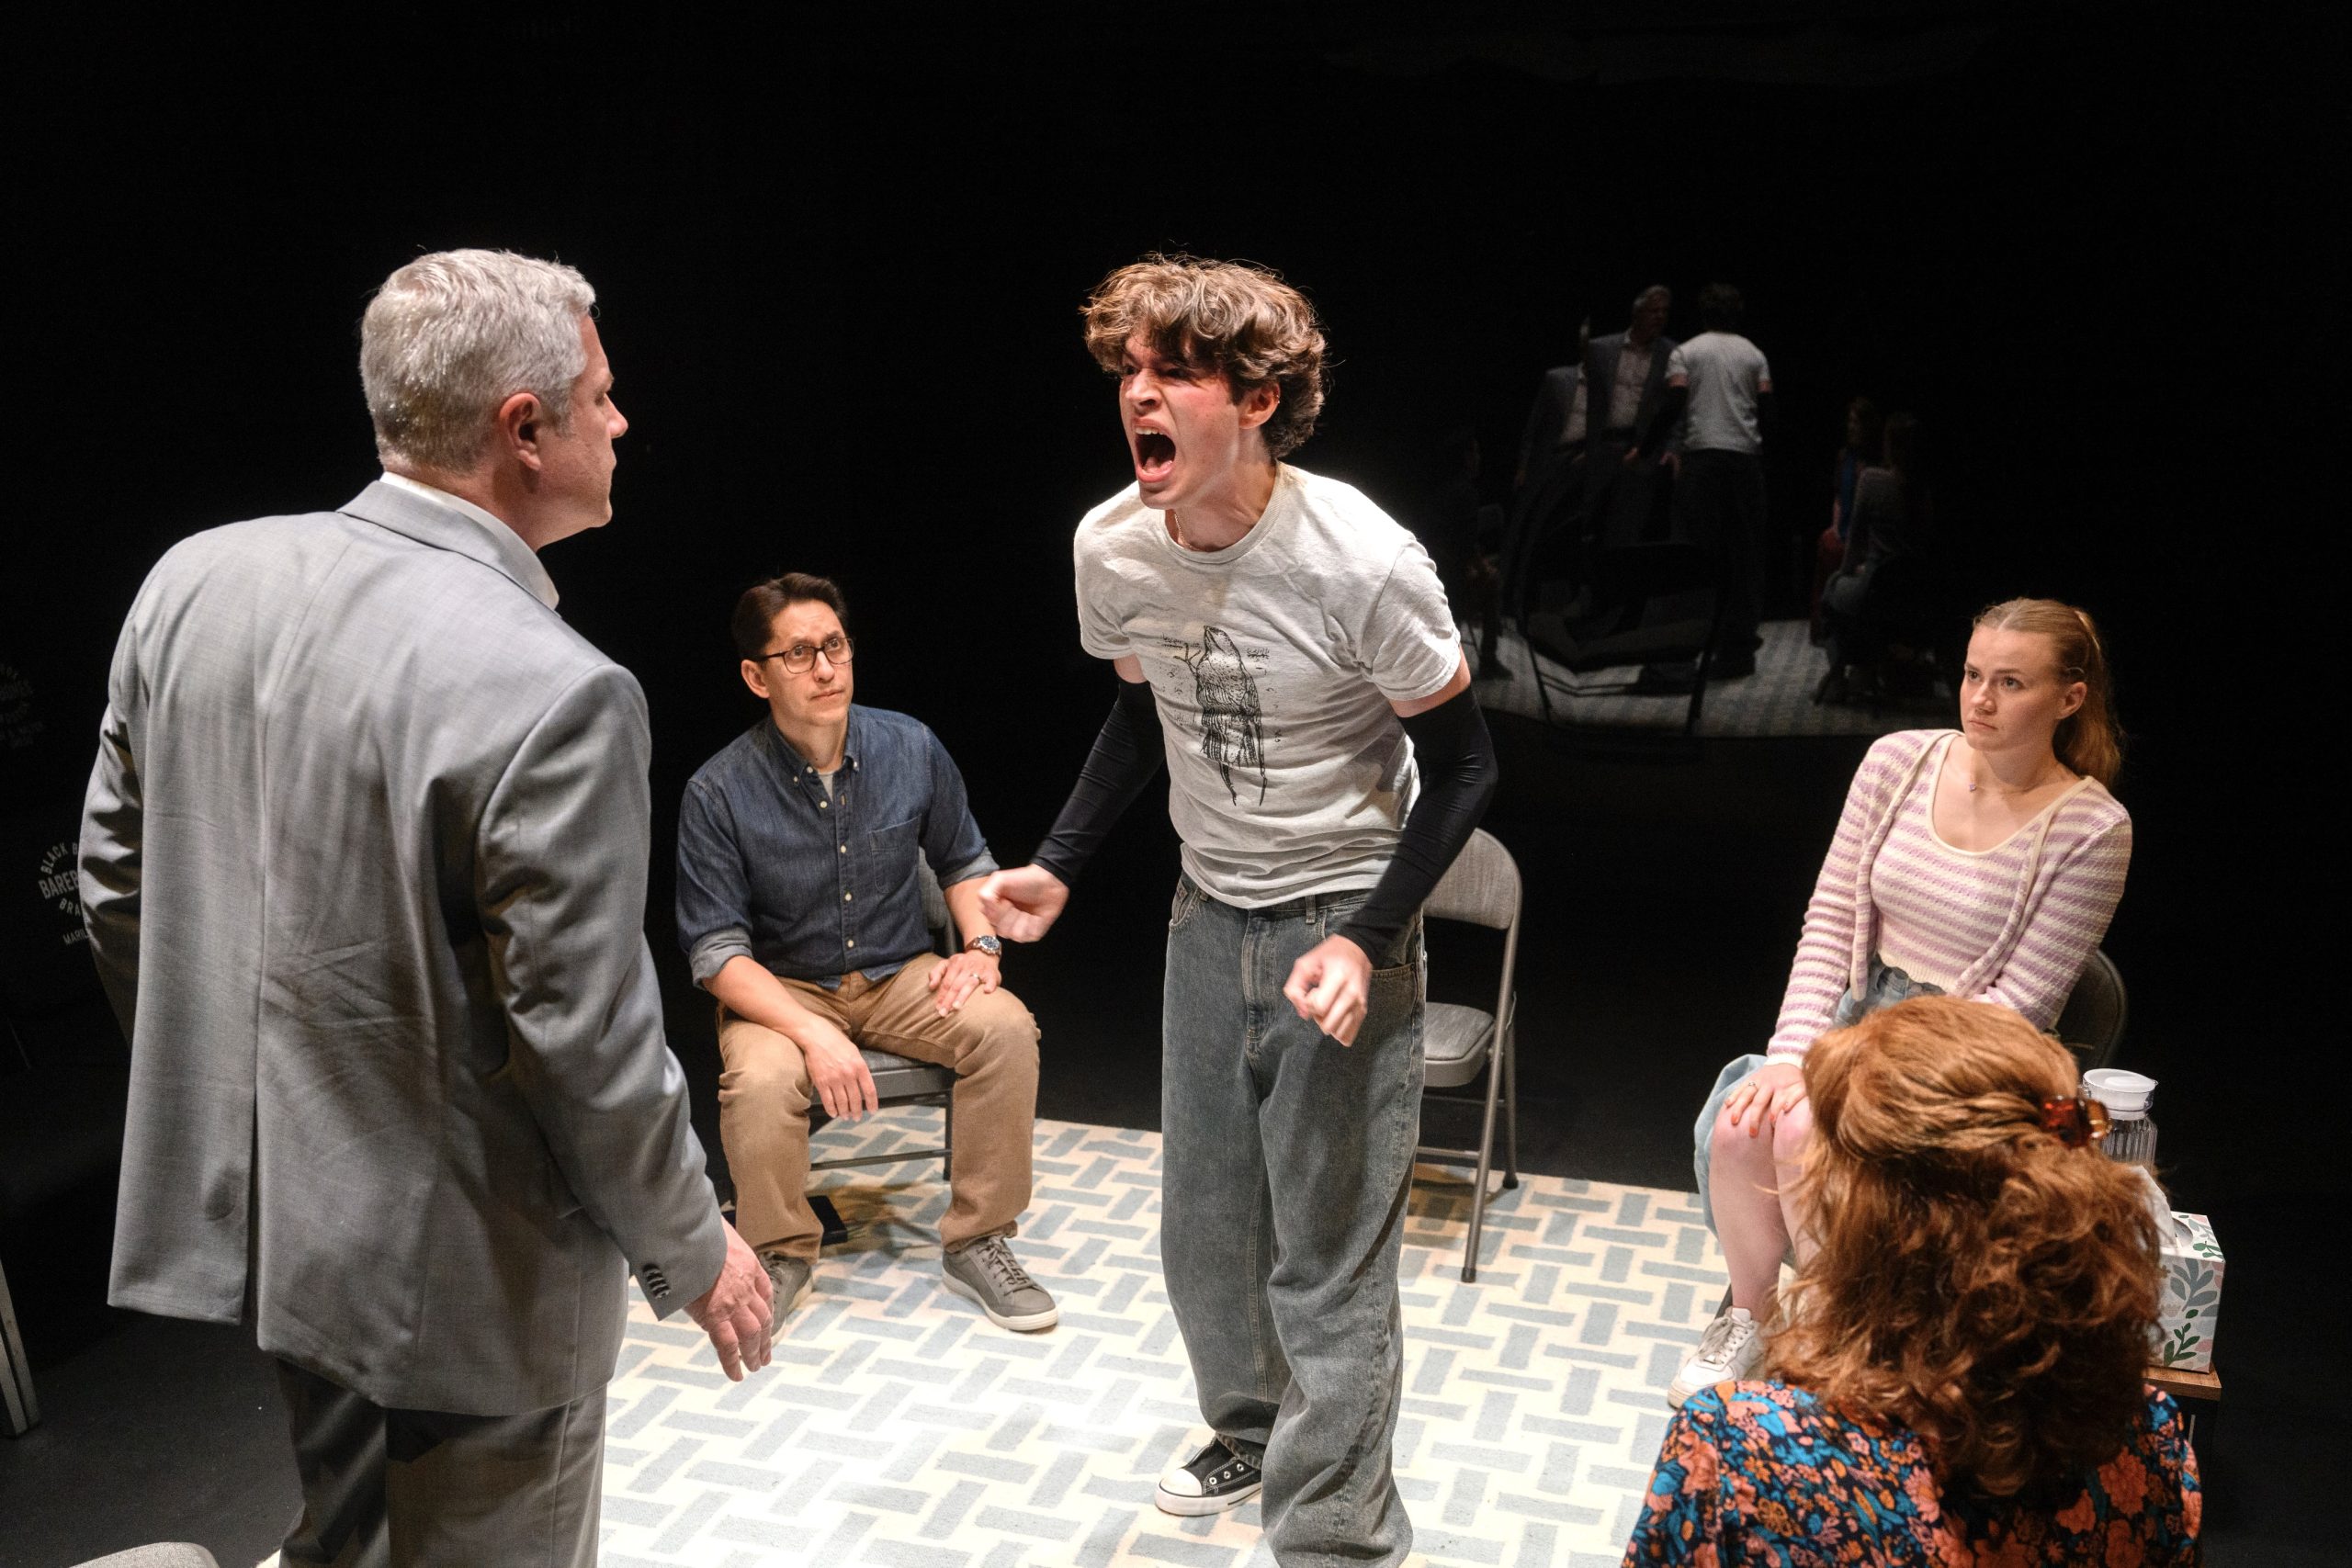 Prodigal son lashes out prodigiously: Sam (Greyson Taylor) has had it with Dad (Darren Eliker, L). The hands-off referee is therapist Daniel (Juan Rivera Lebron); the spectators are Sam's sister (Alexandra Casey) and mother (Daina Michelle Griffith, showing red hair).